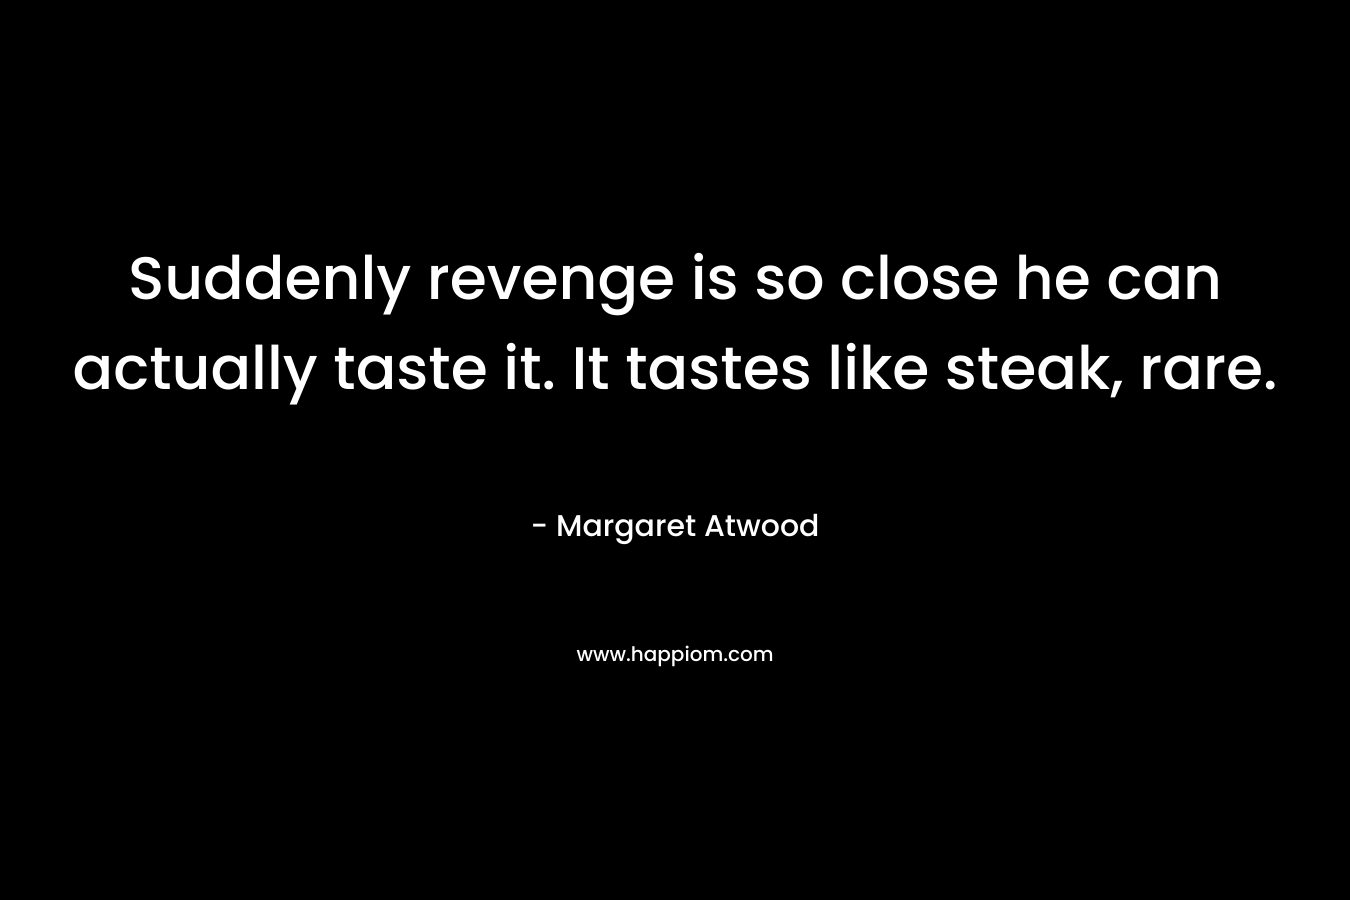 Suddenly revenge is so close he can actually taste it. It tastes like steak, rare. – Margaret Atwood